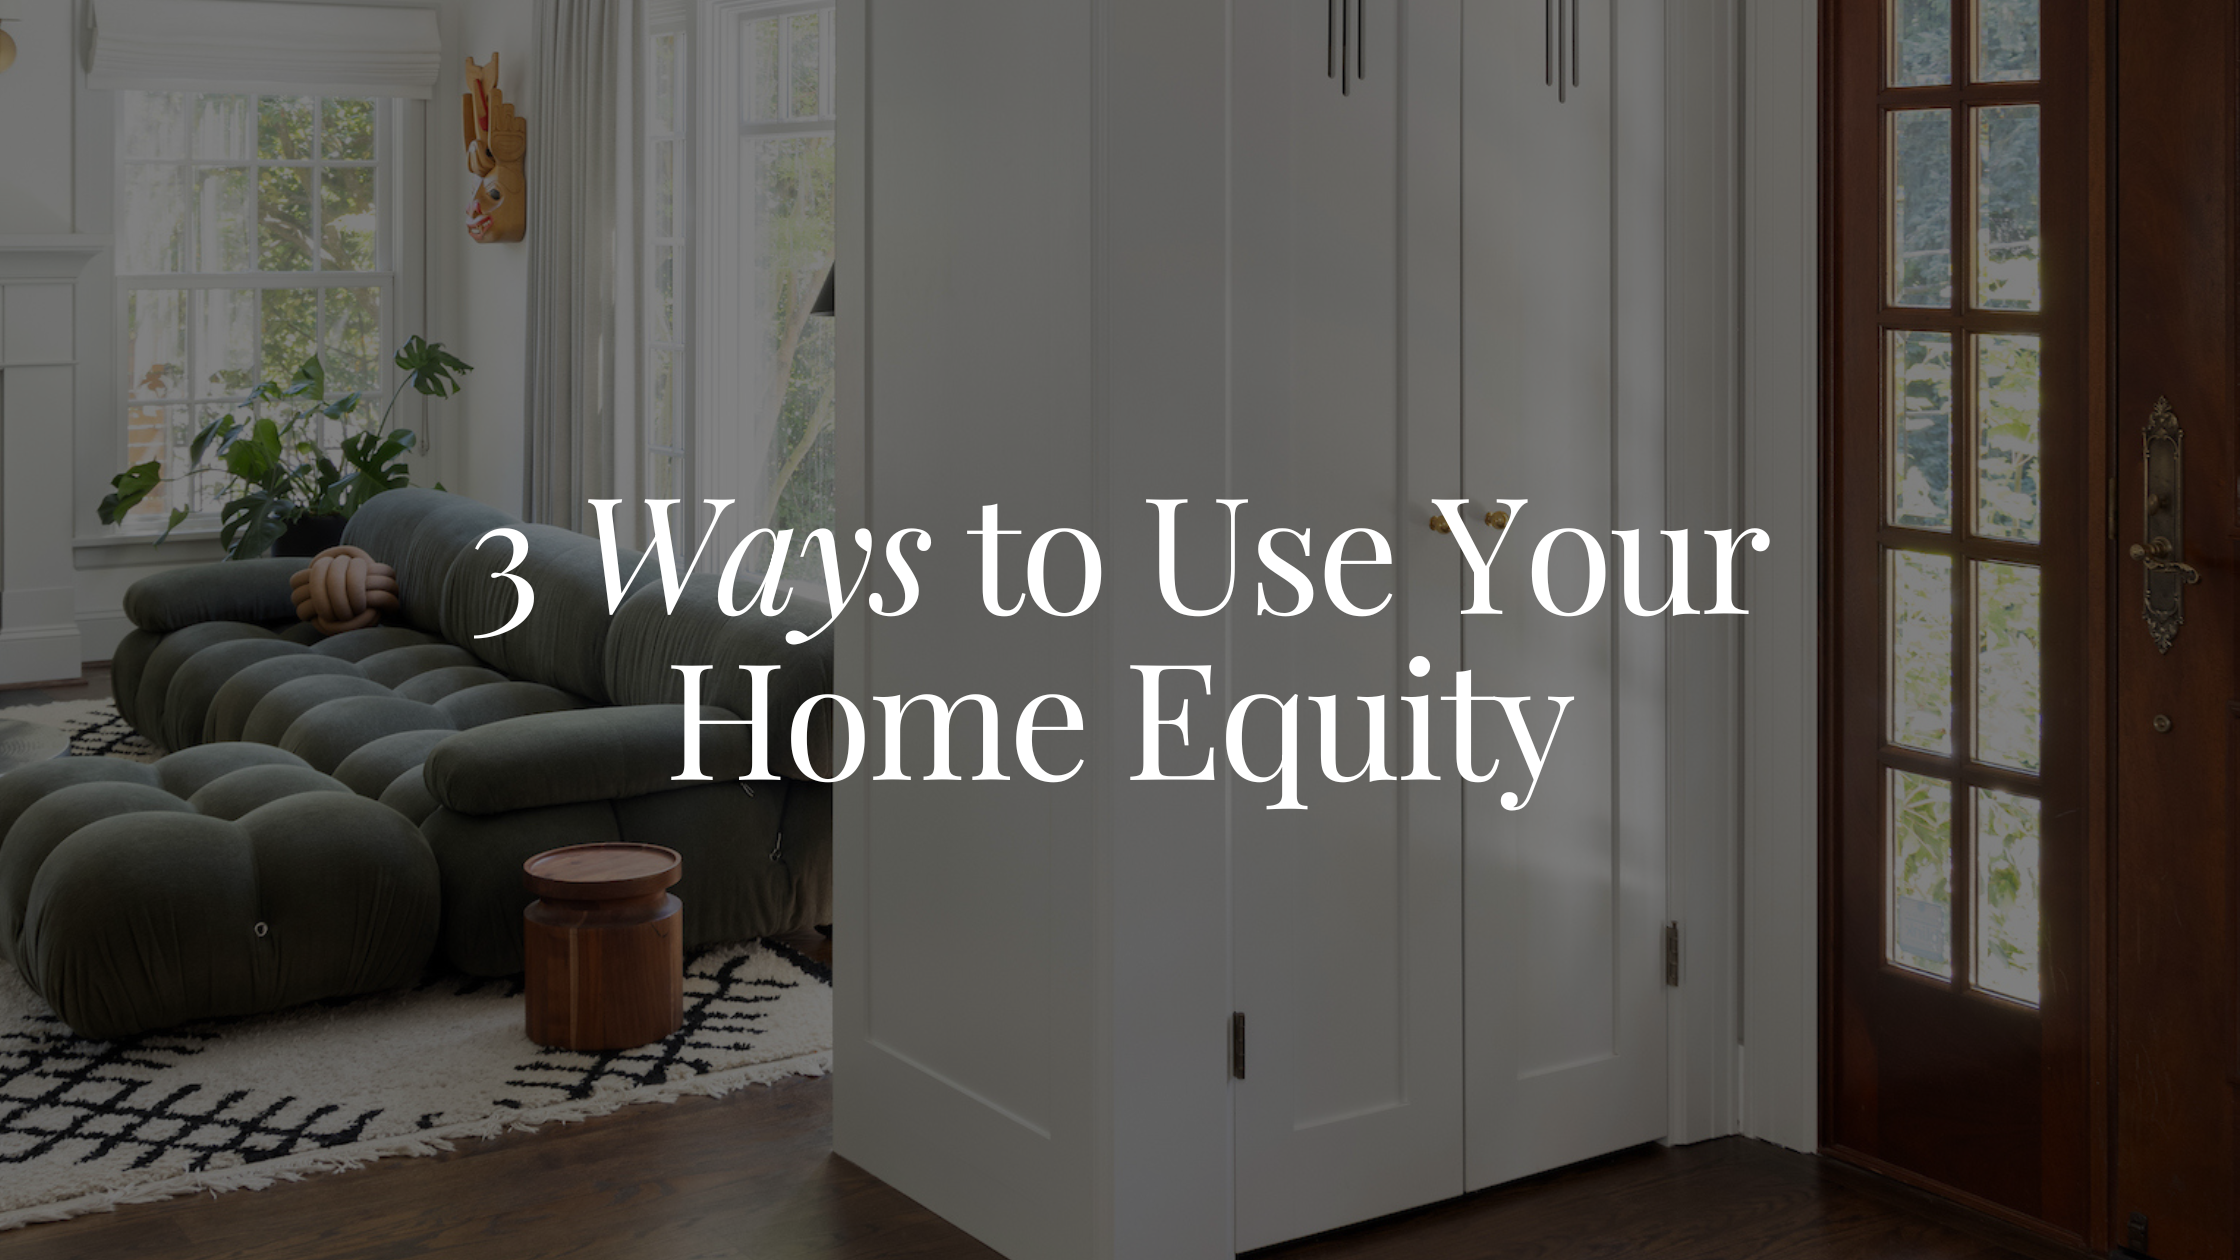 3 Ways to Use Your Home Equity